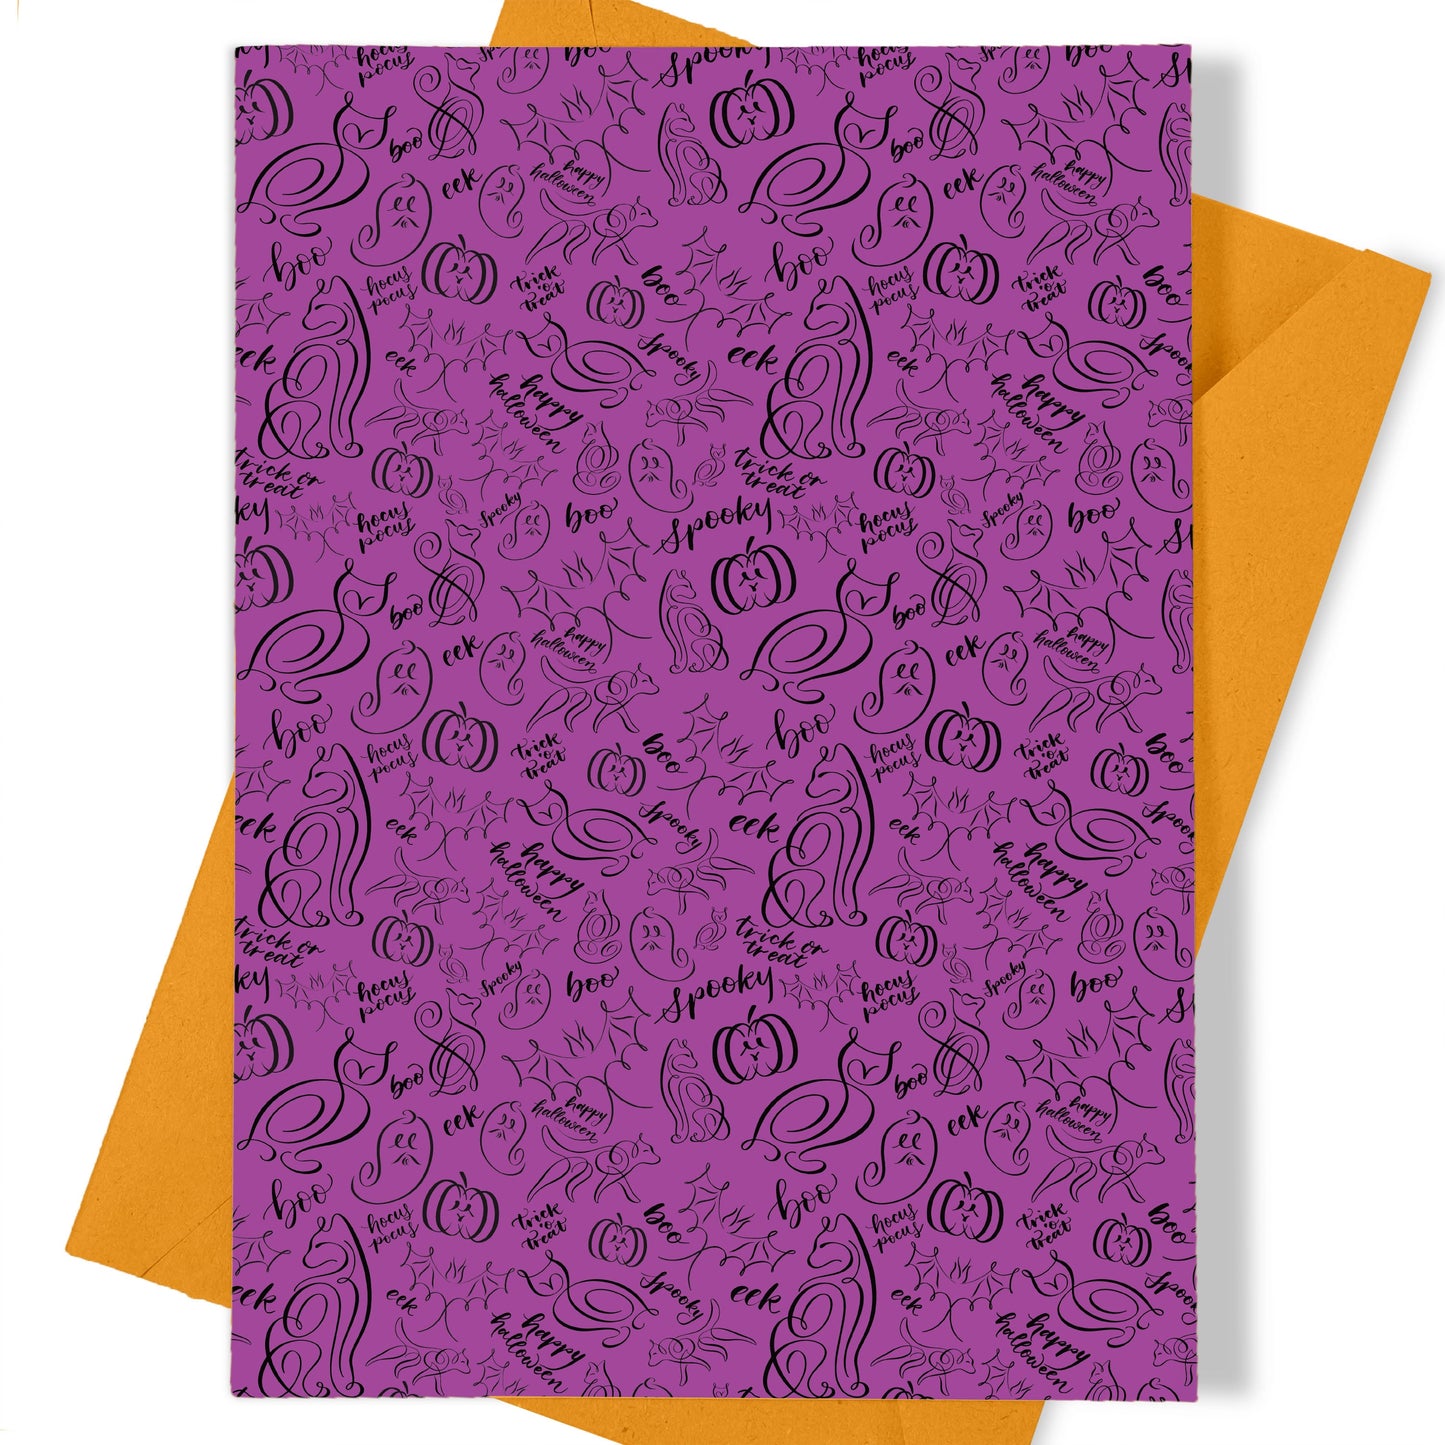 A thumbnail view of the halloween calligraphy card: "monster mash (heavy design)" repeating pattern